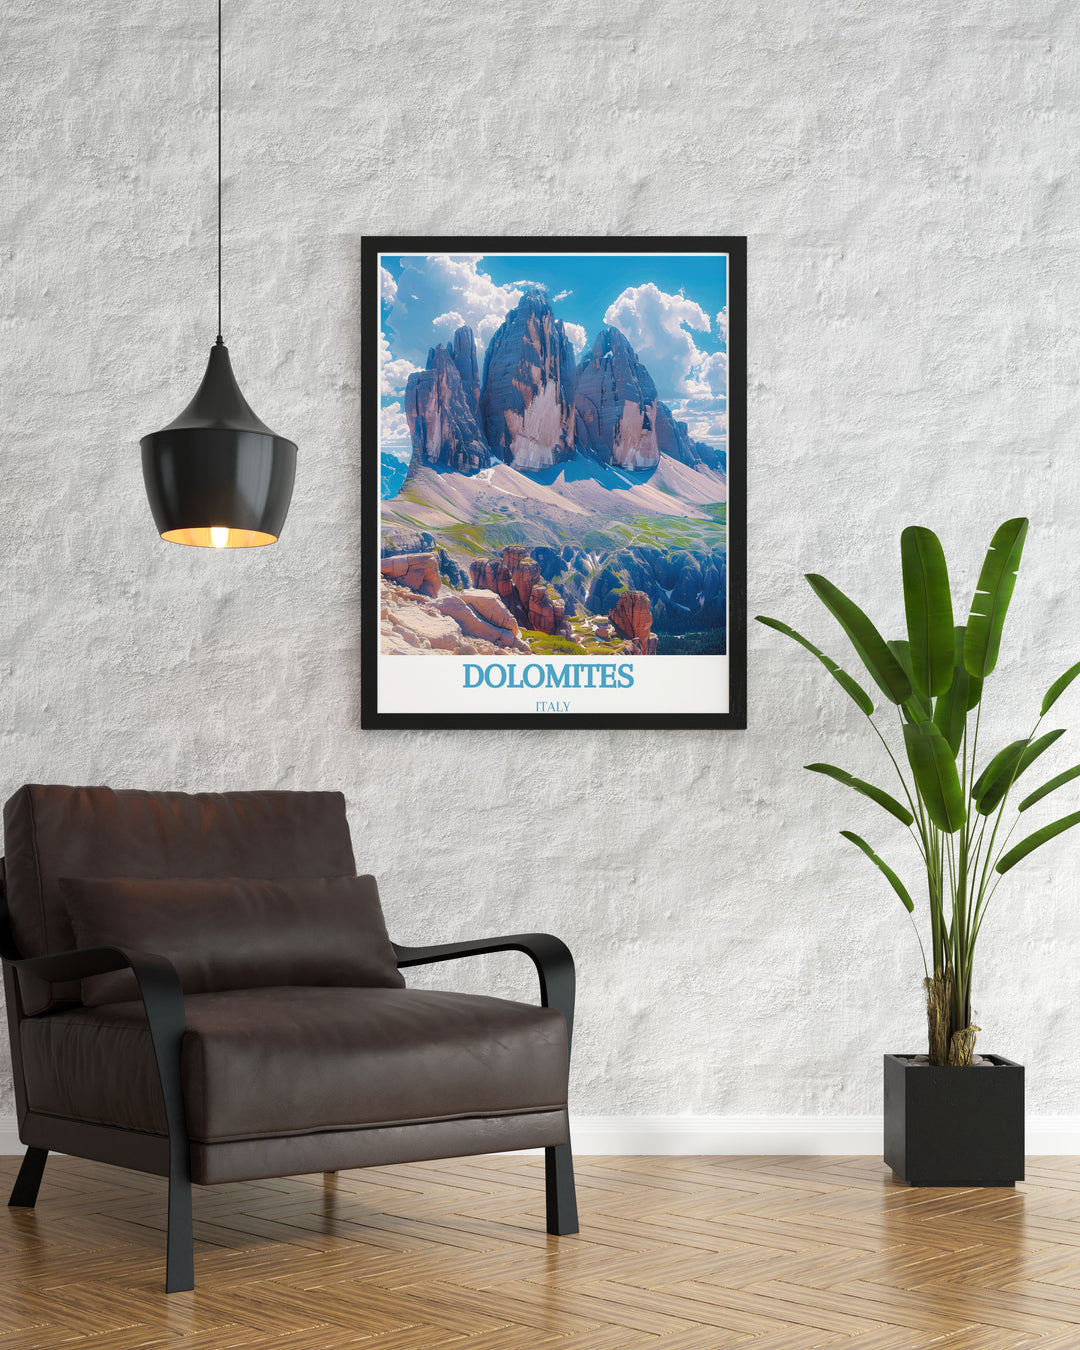 Gallery wall art illustrating the majestic landscapes of Tre Cime di Lavaredo, with its towering peaks and serene vistas, perfect for enhancing any room with the charm of the Dolomites.